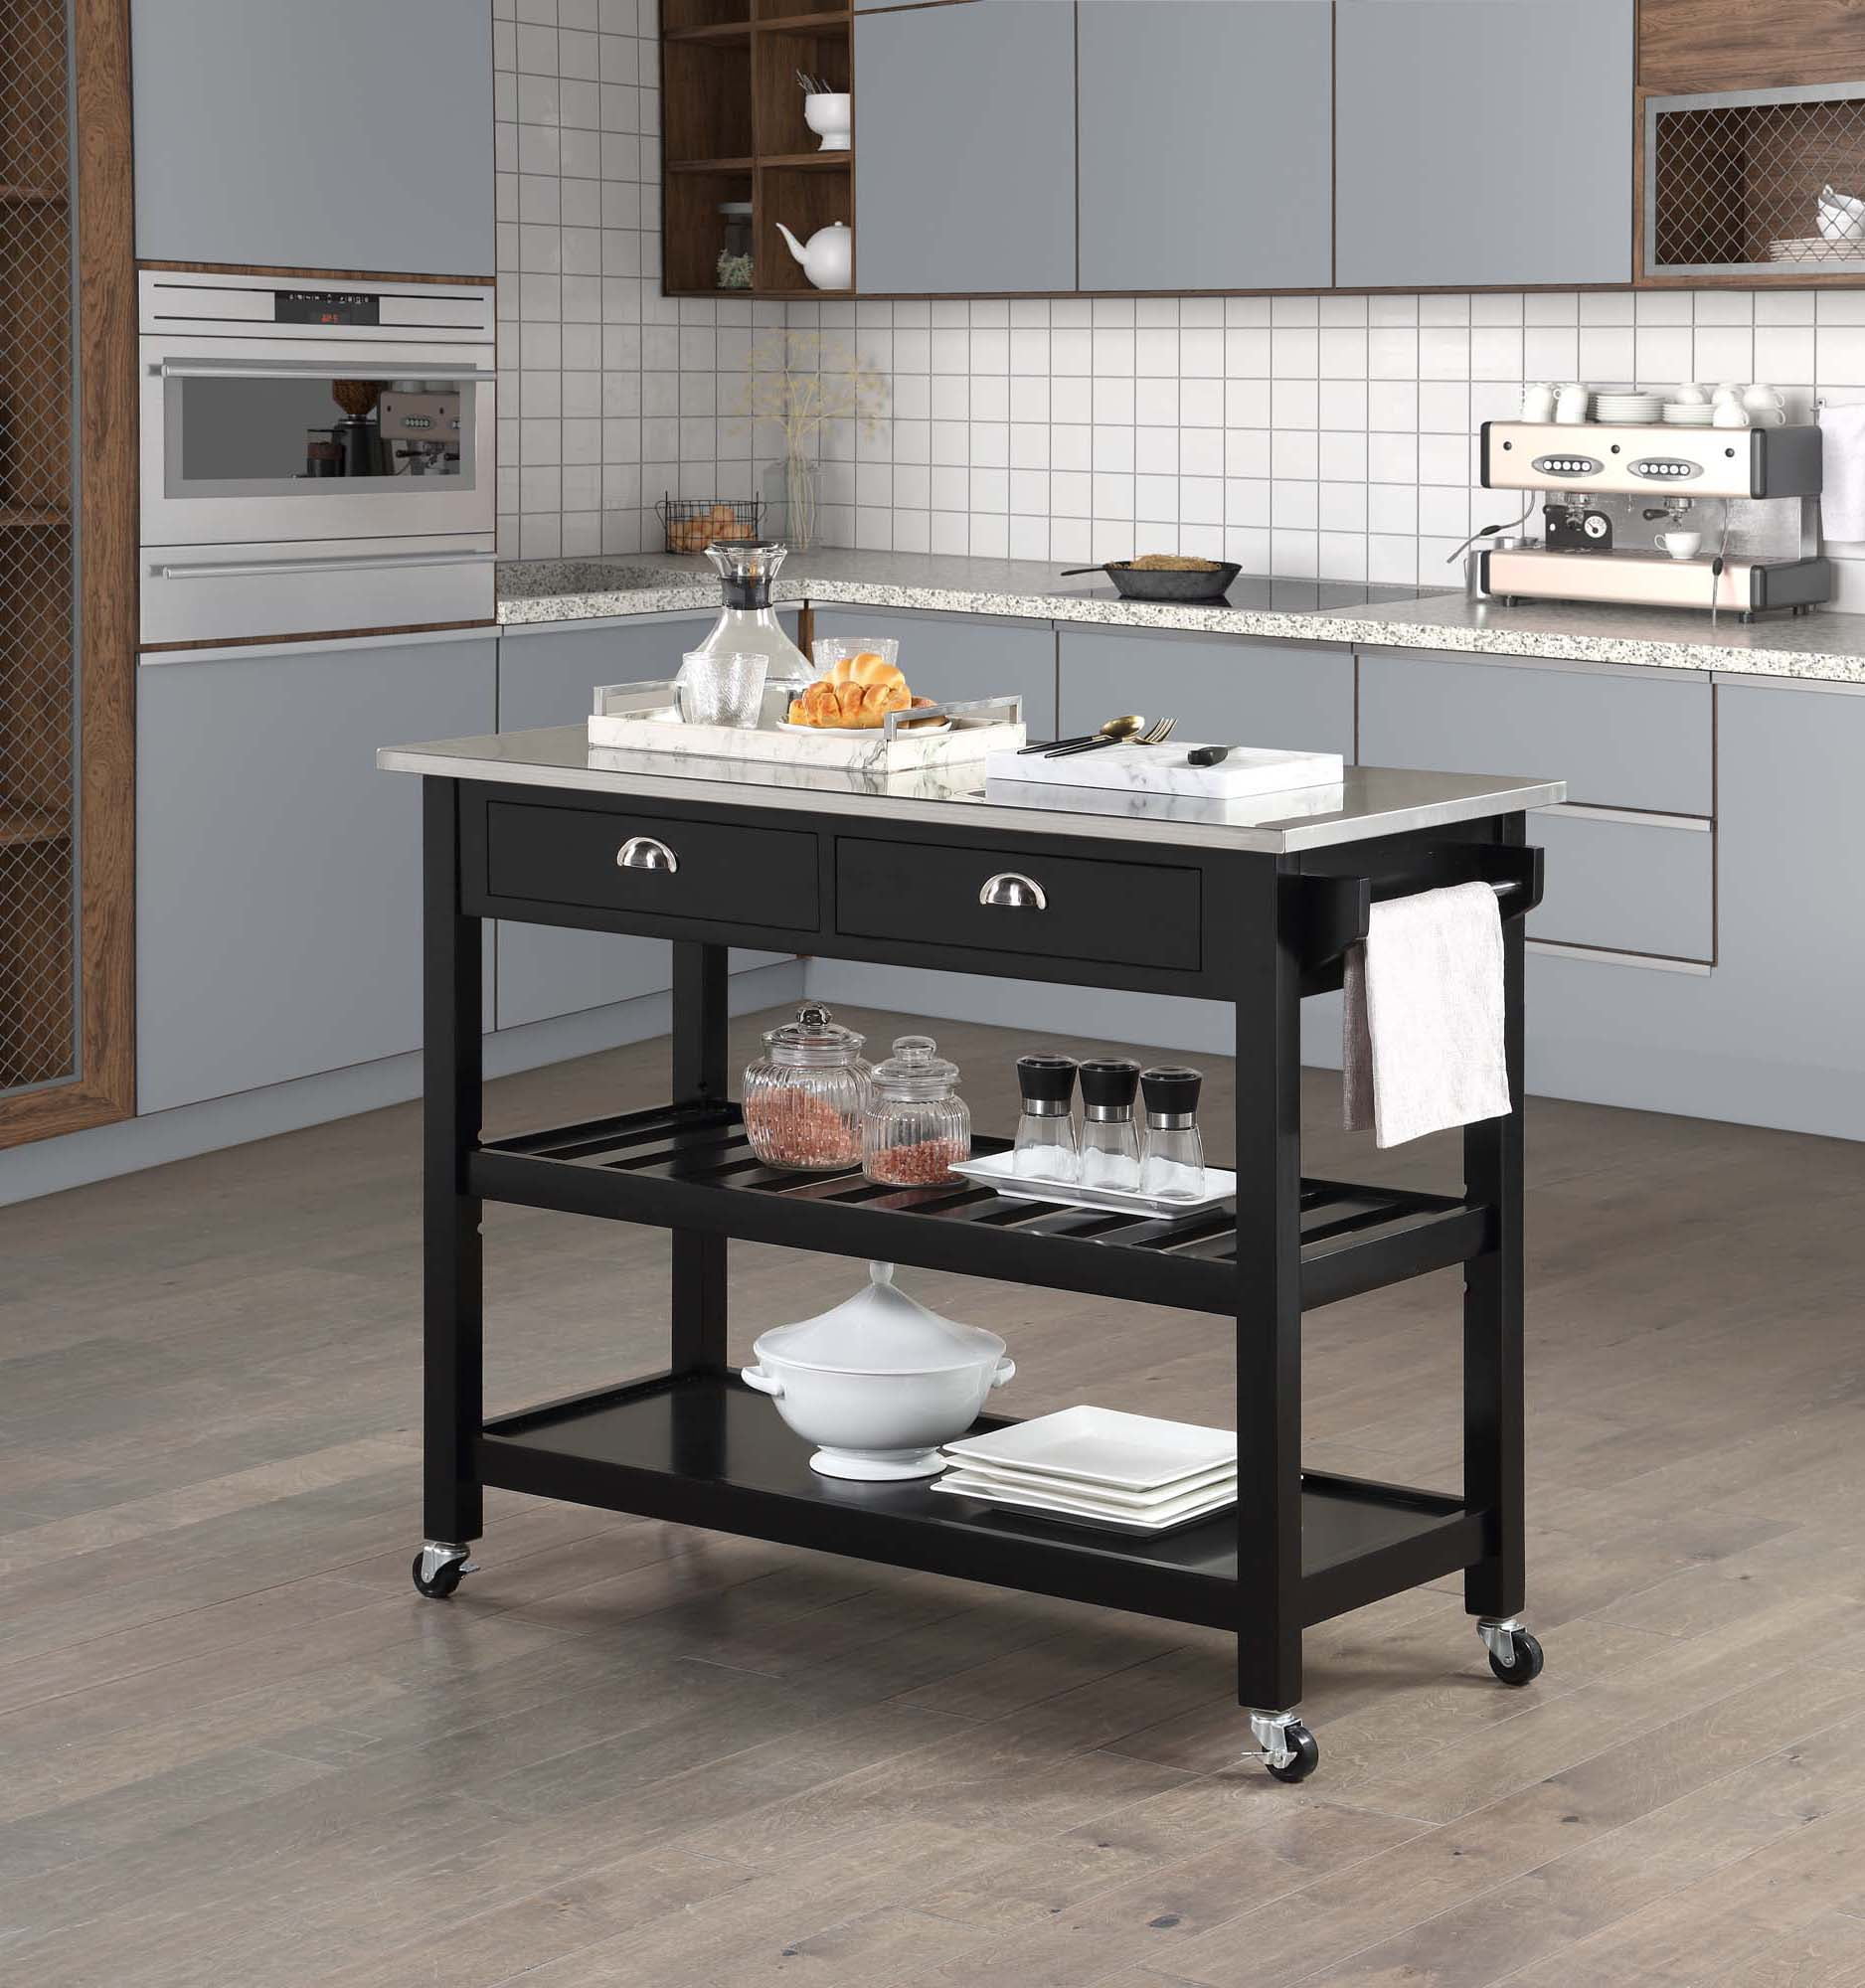 Picture of Convenience Concepts 802240BL American Heritage 3 Tier Stainless Steel Kitchen Cart with Drawers - Stainless Steel/Black